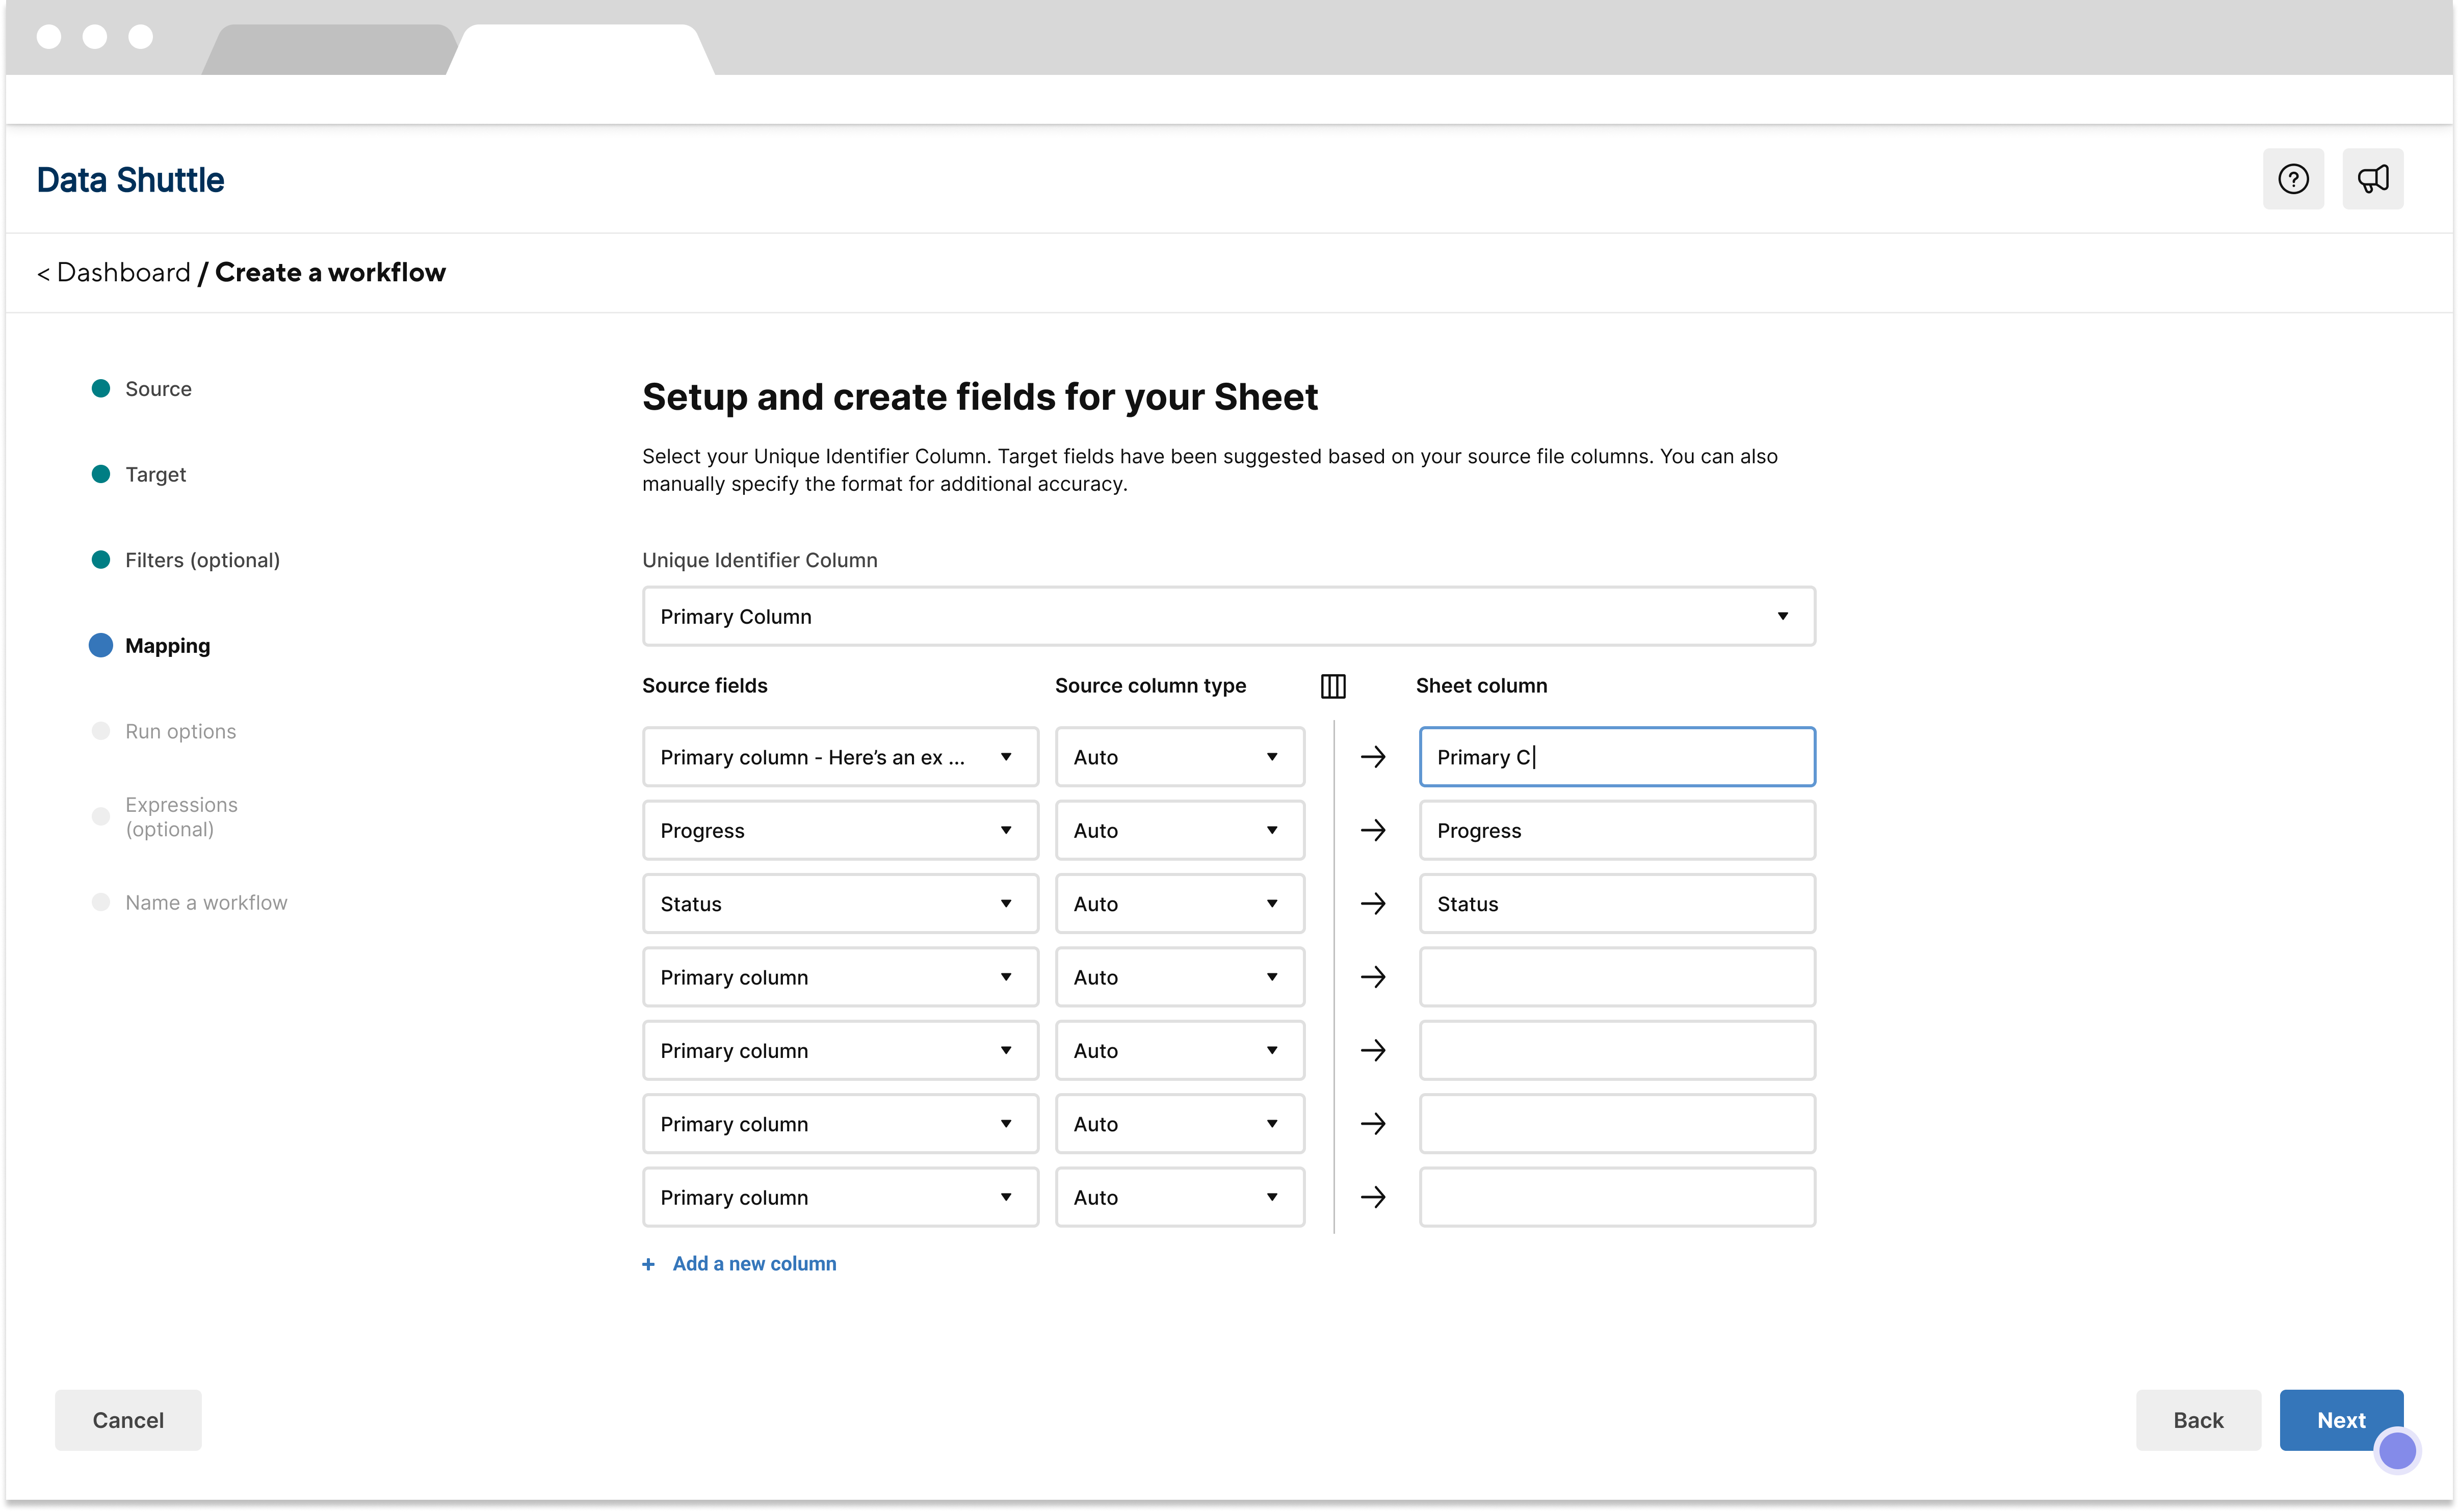 Select and create fields for your sheet